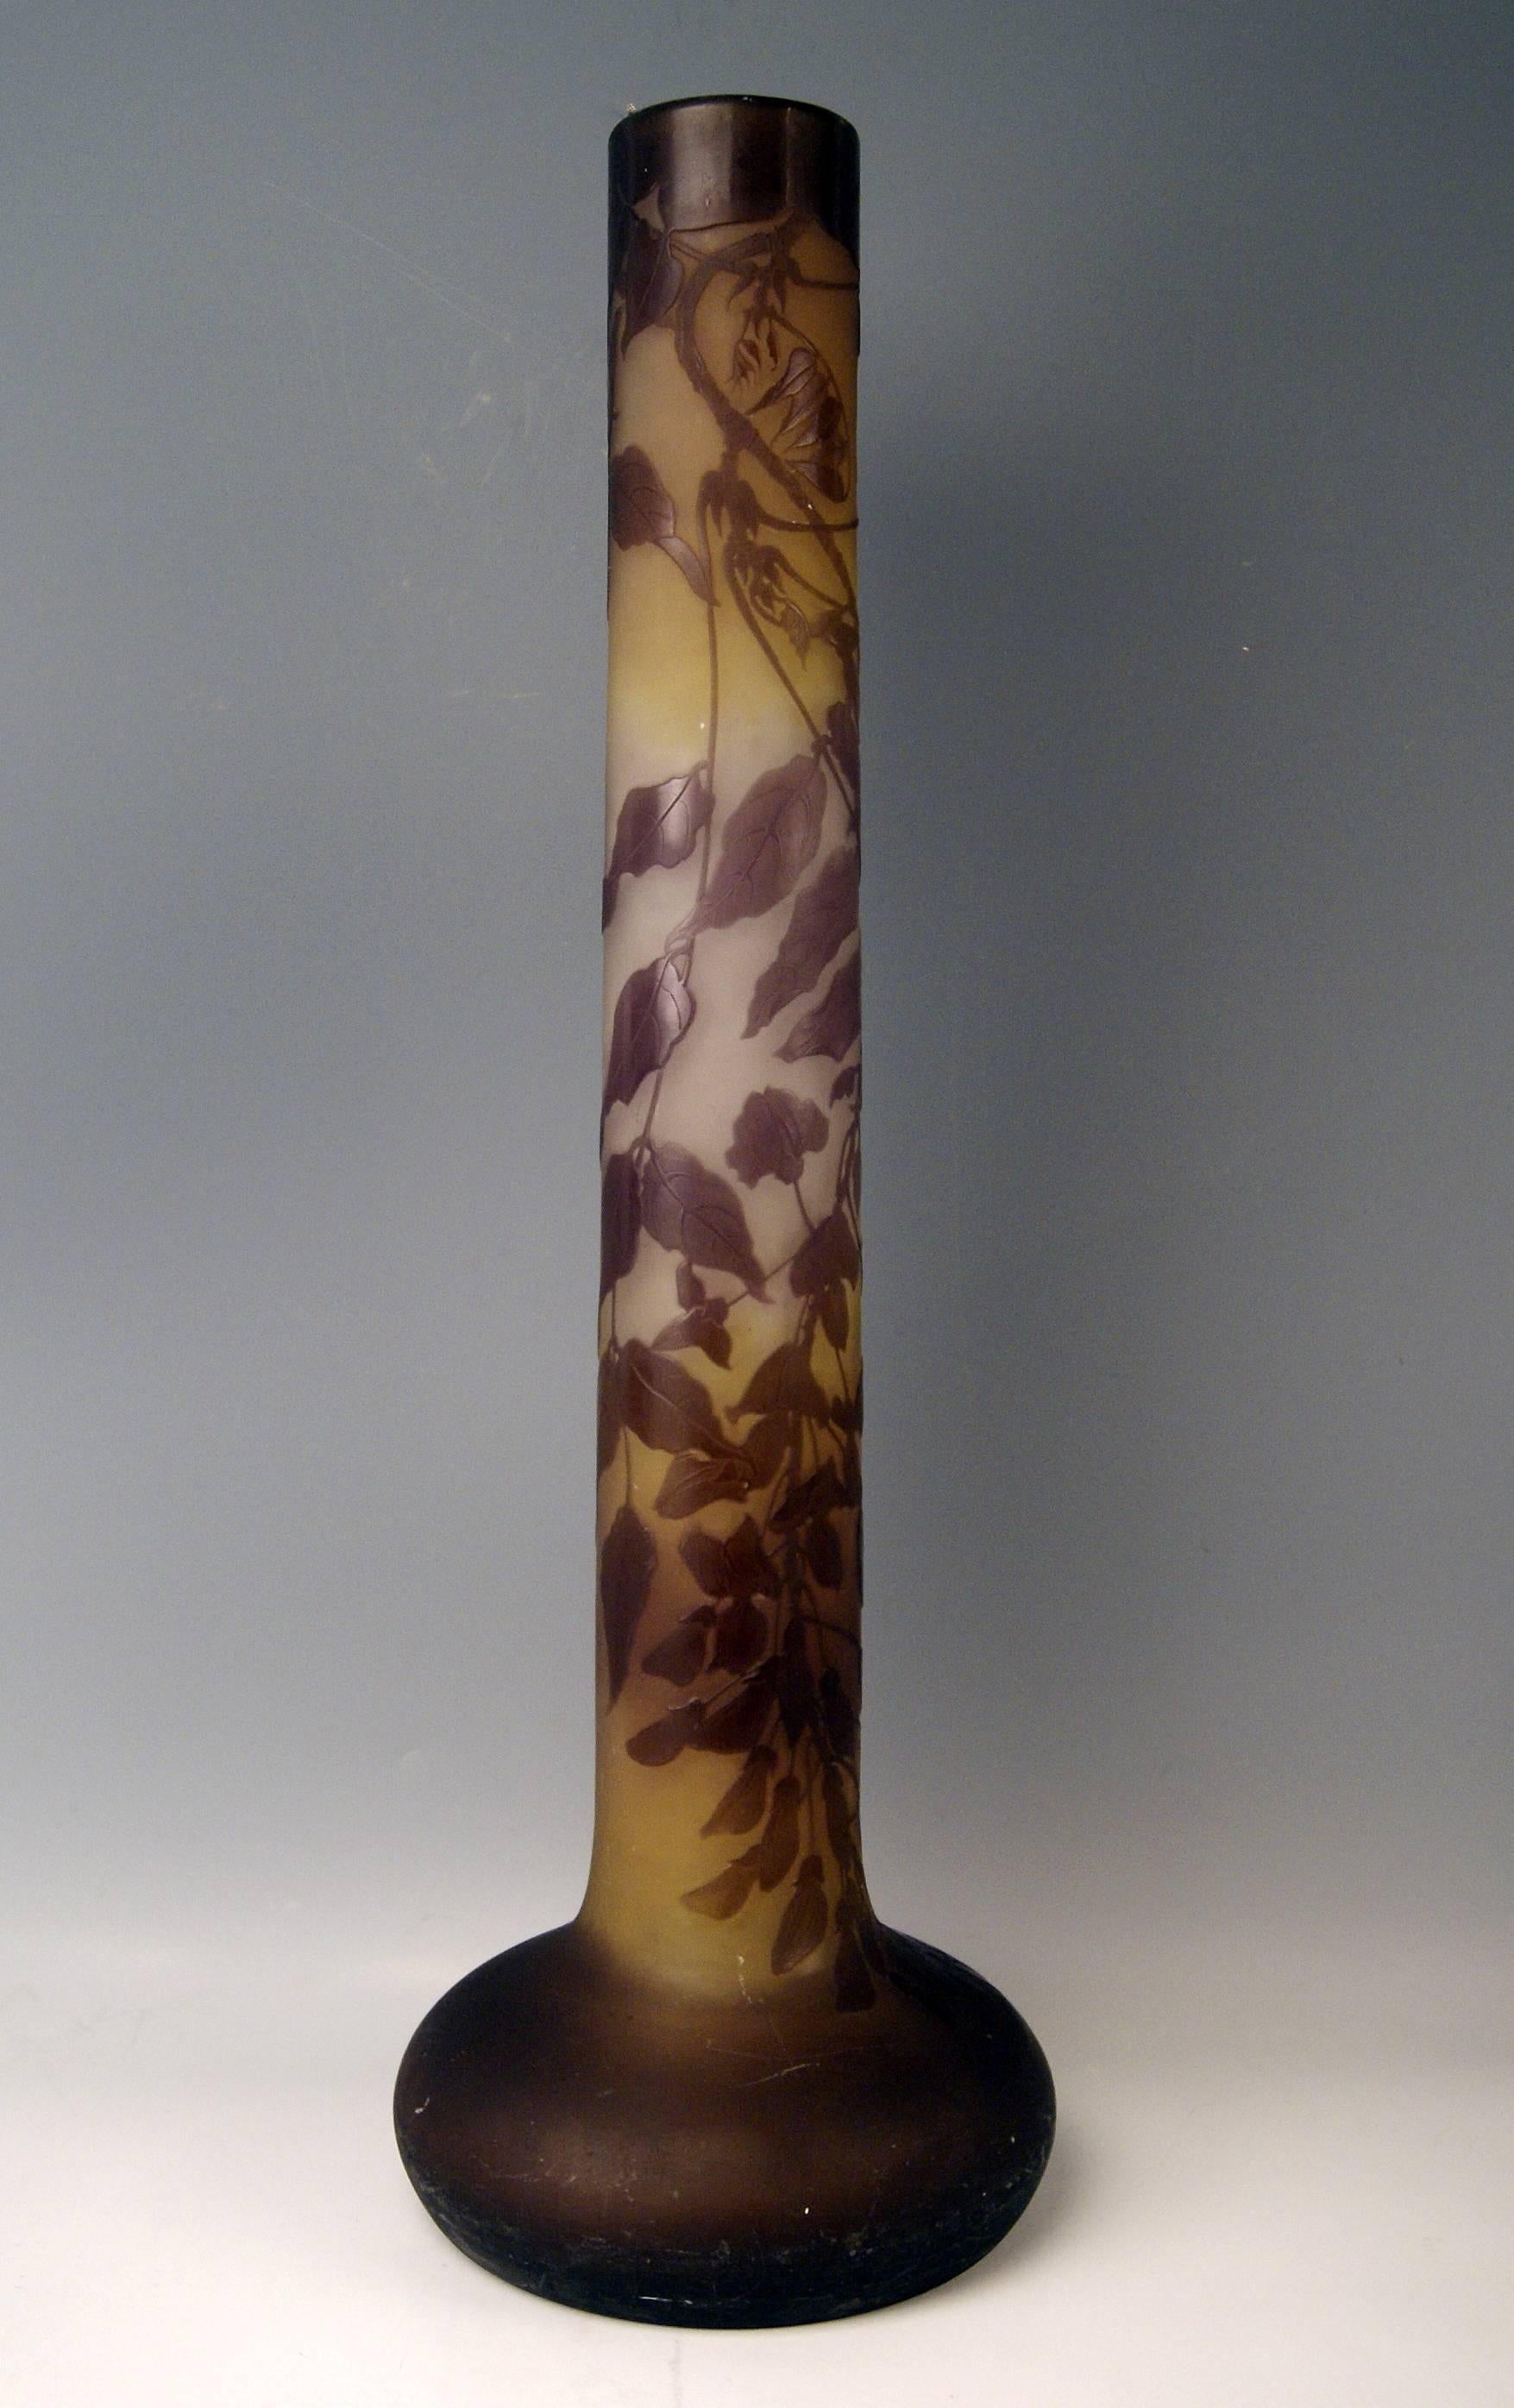 French Galle Nancy Huge Art Nouveau Stalky Vase Wysteria, ca 1904, Height:29.33 inches